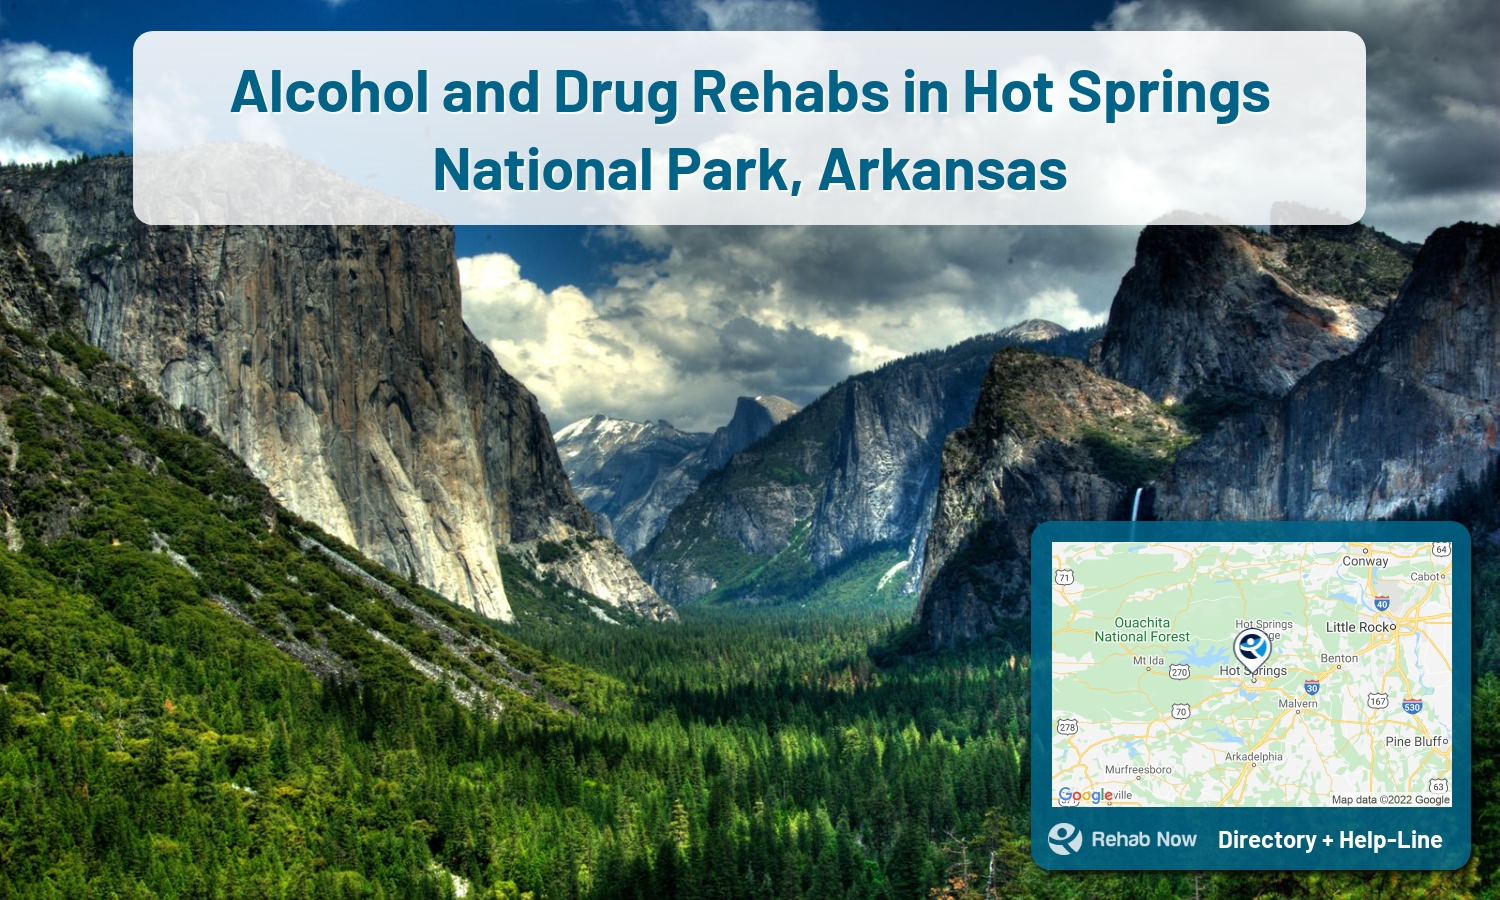 Our experts can help you find treatment now in Hot Springs National Park, Arkansas. We list drug rehab and alcohol centers in Arkansas.